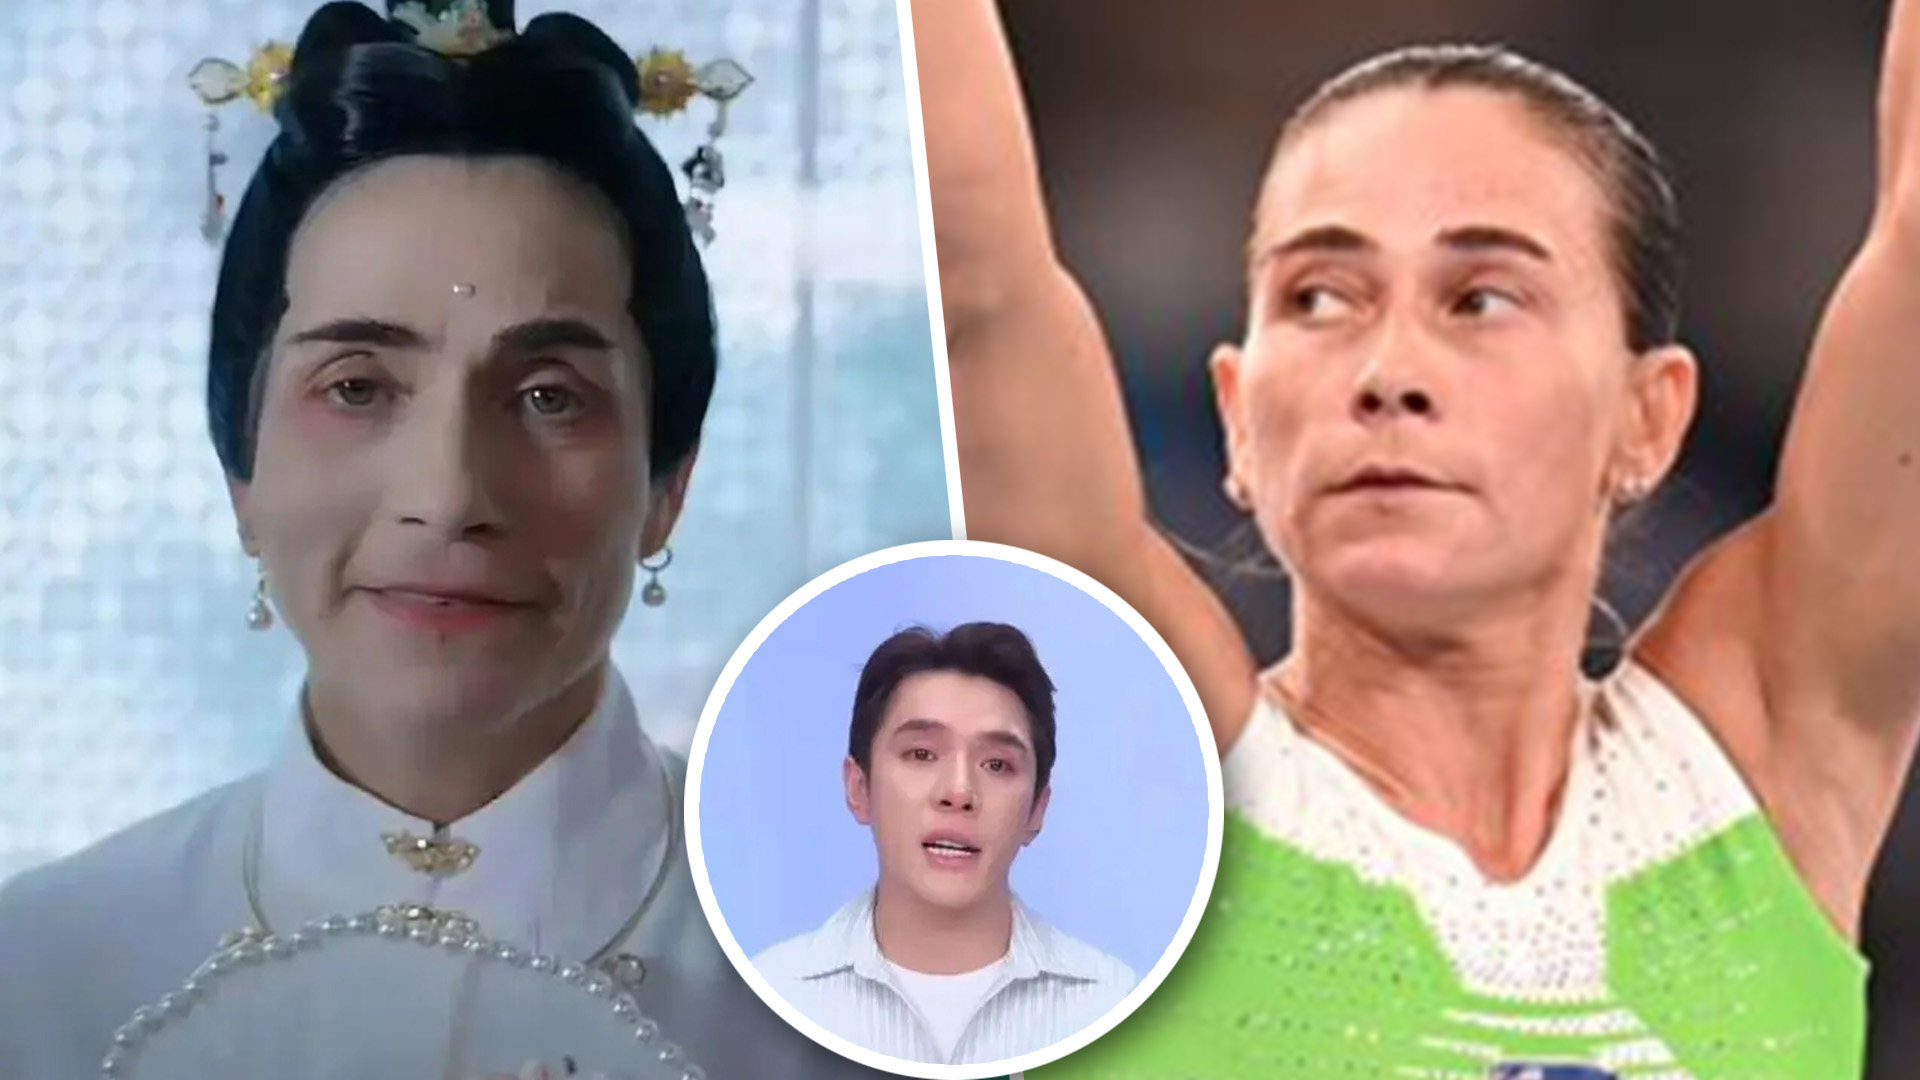 Renowned gymnast Oksana Chusovitina has upset her considerable fanbase in China by entering into a “tasteless” collaboration with a mainland cosmetics brand while many pointed out her make-up is strikingly similar to that of the popular “Lipstick King” Li Jiaqi (inset). Photo: SCMP composite/Douyin/Xinhua